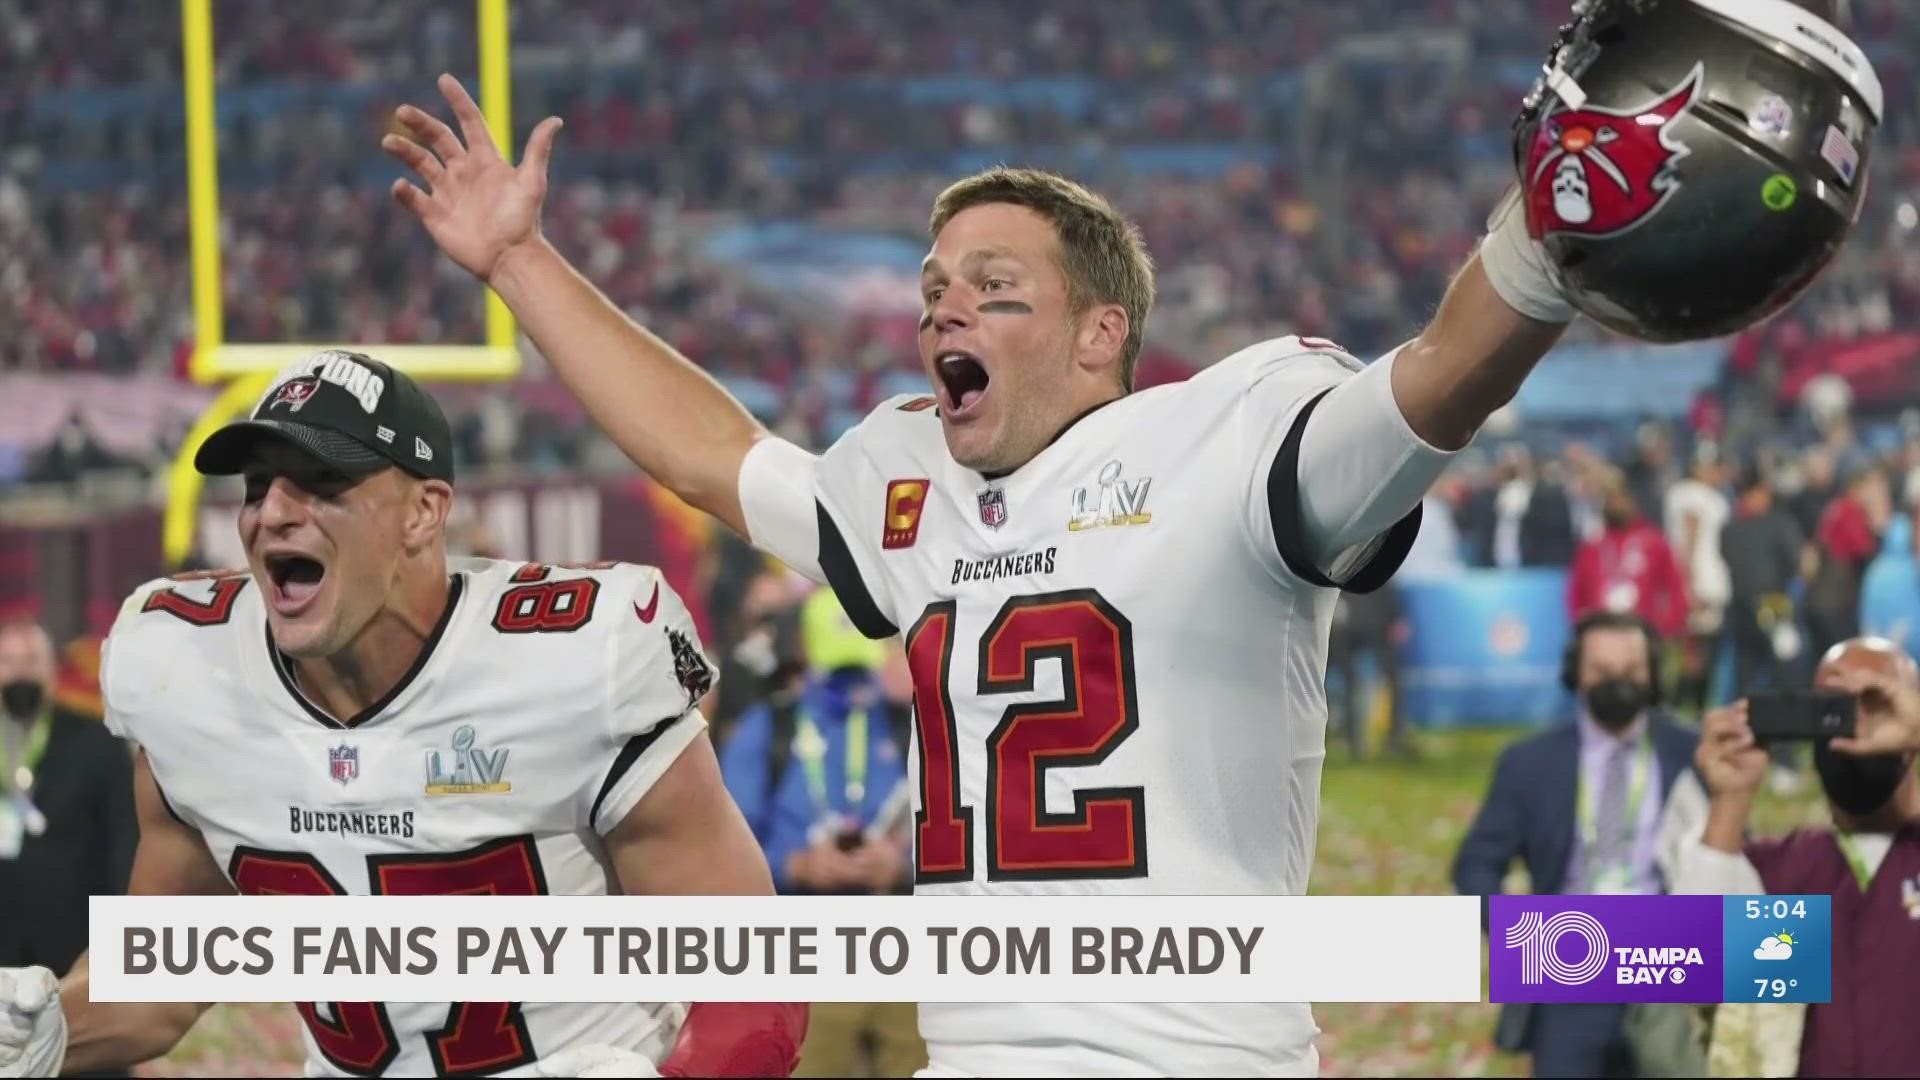 Even with Tom Brady's exit, fans are ready to support the Buccaneers next season.